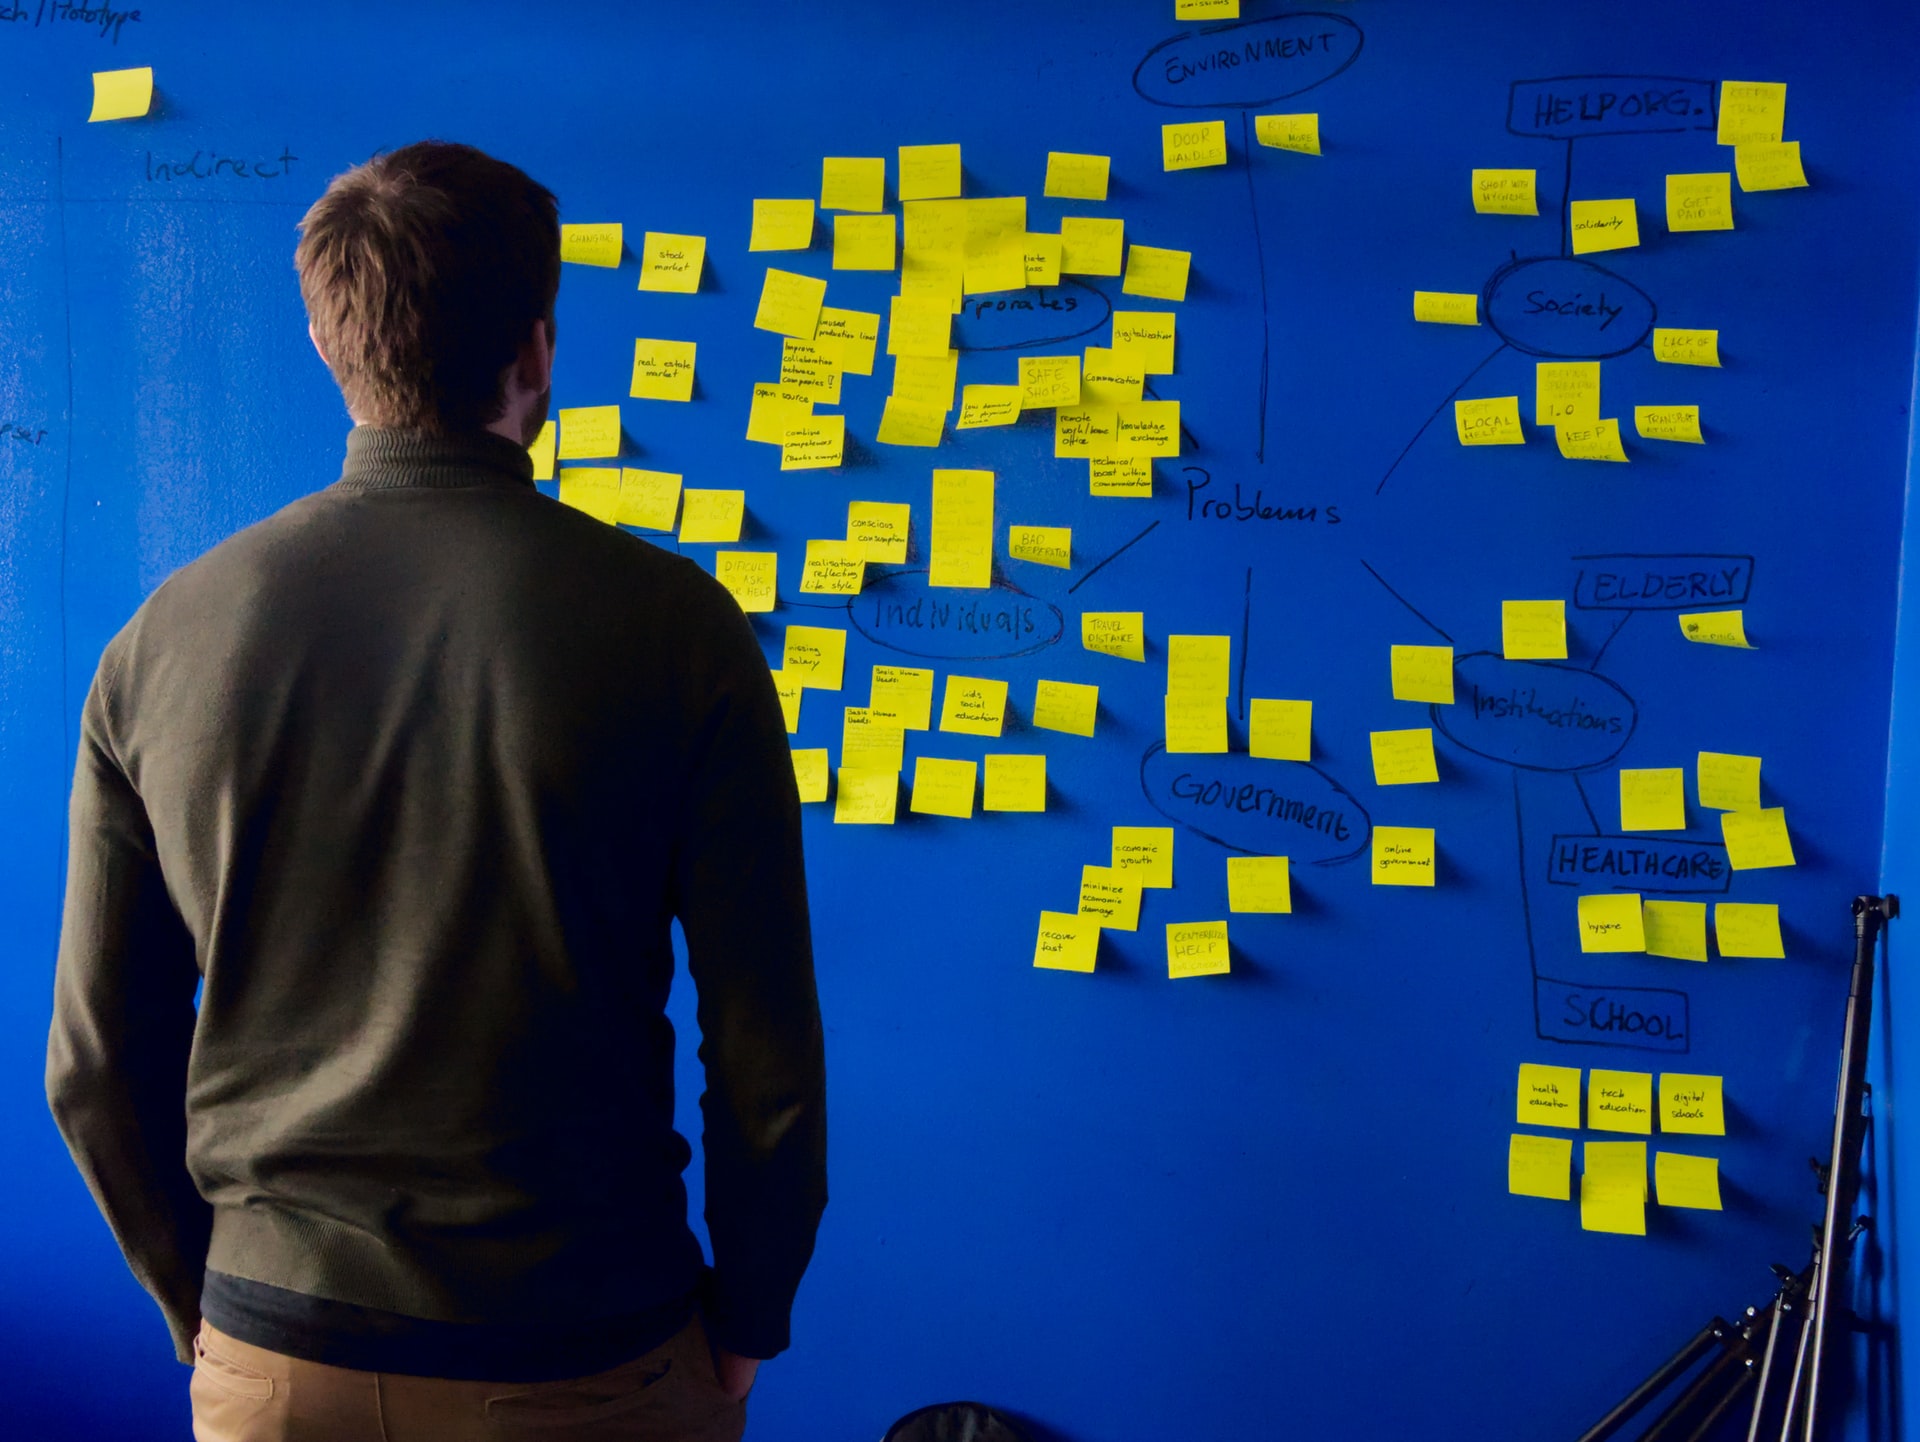 A man stands in front of a dark blue wall. He's doing a brainstorming session. There are written problems on the wall's centre, and there are yellow sticky notes around it. He's trying to devise solutions for the issues using the brainstorming session.